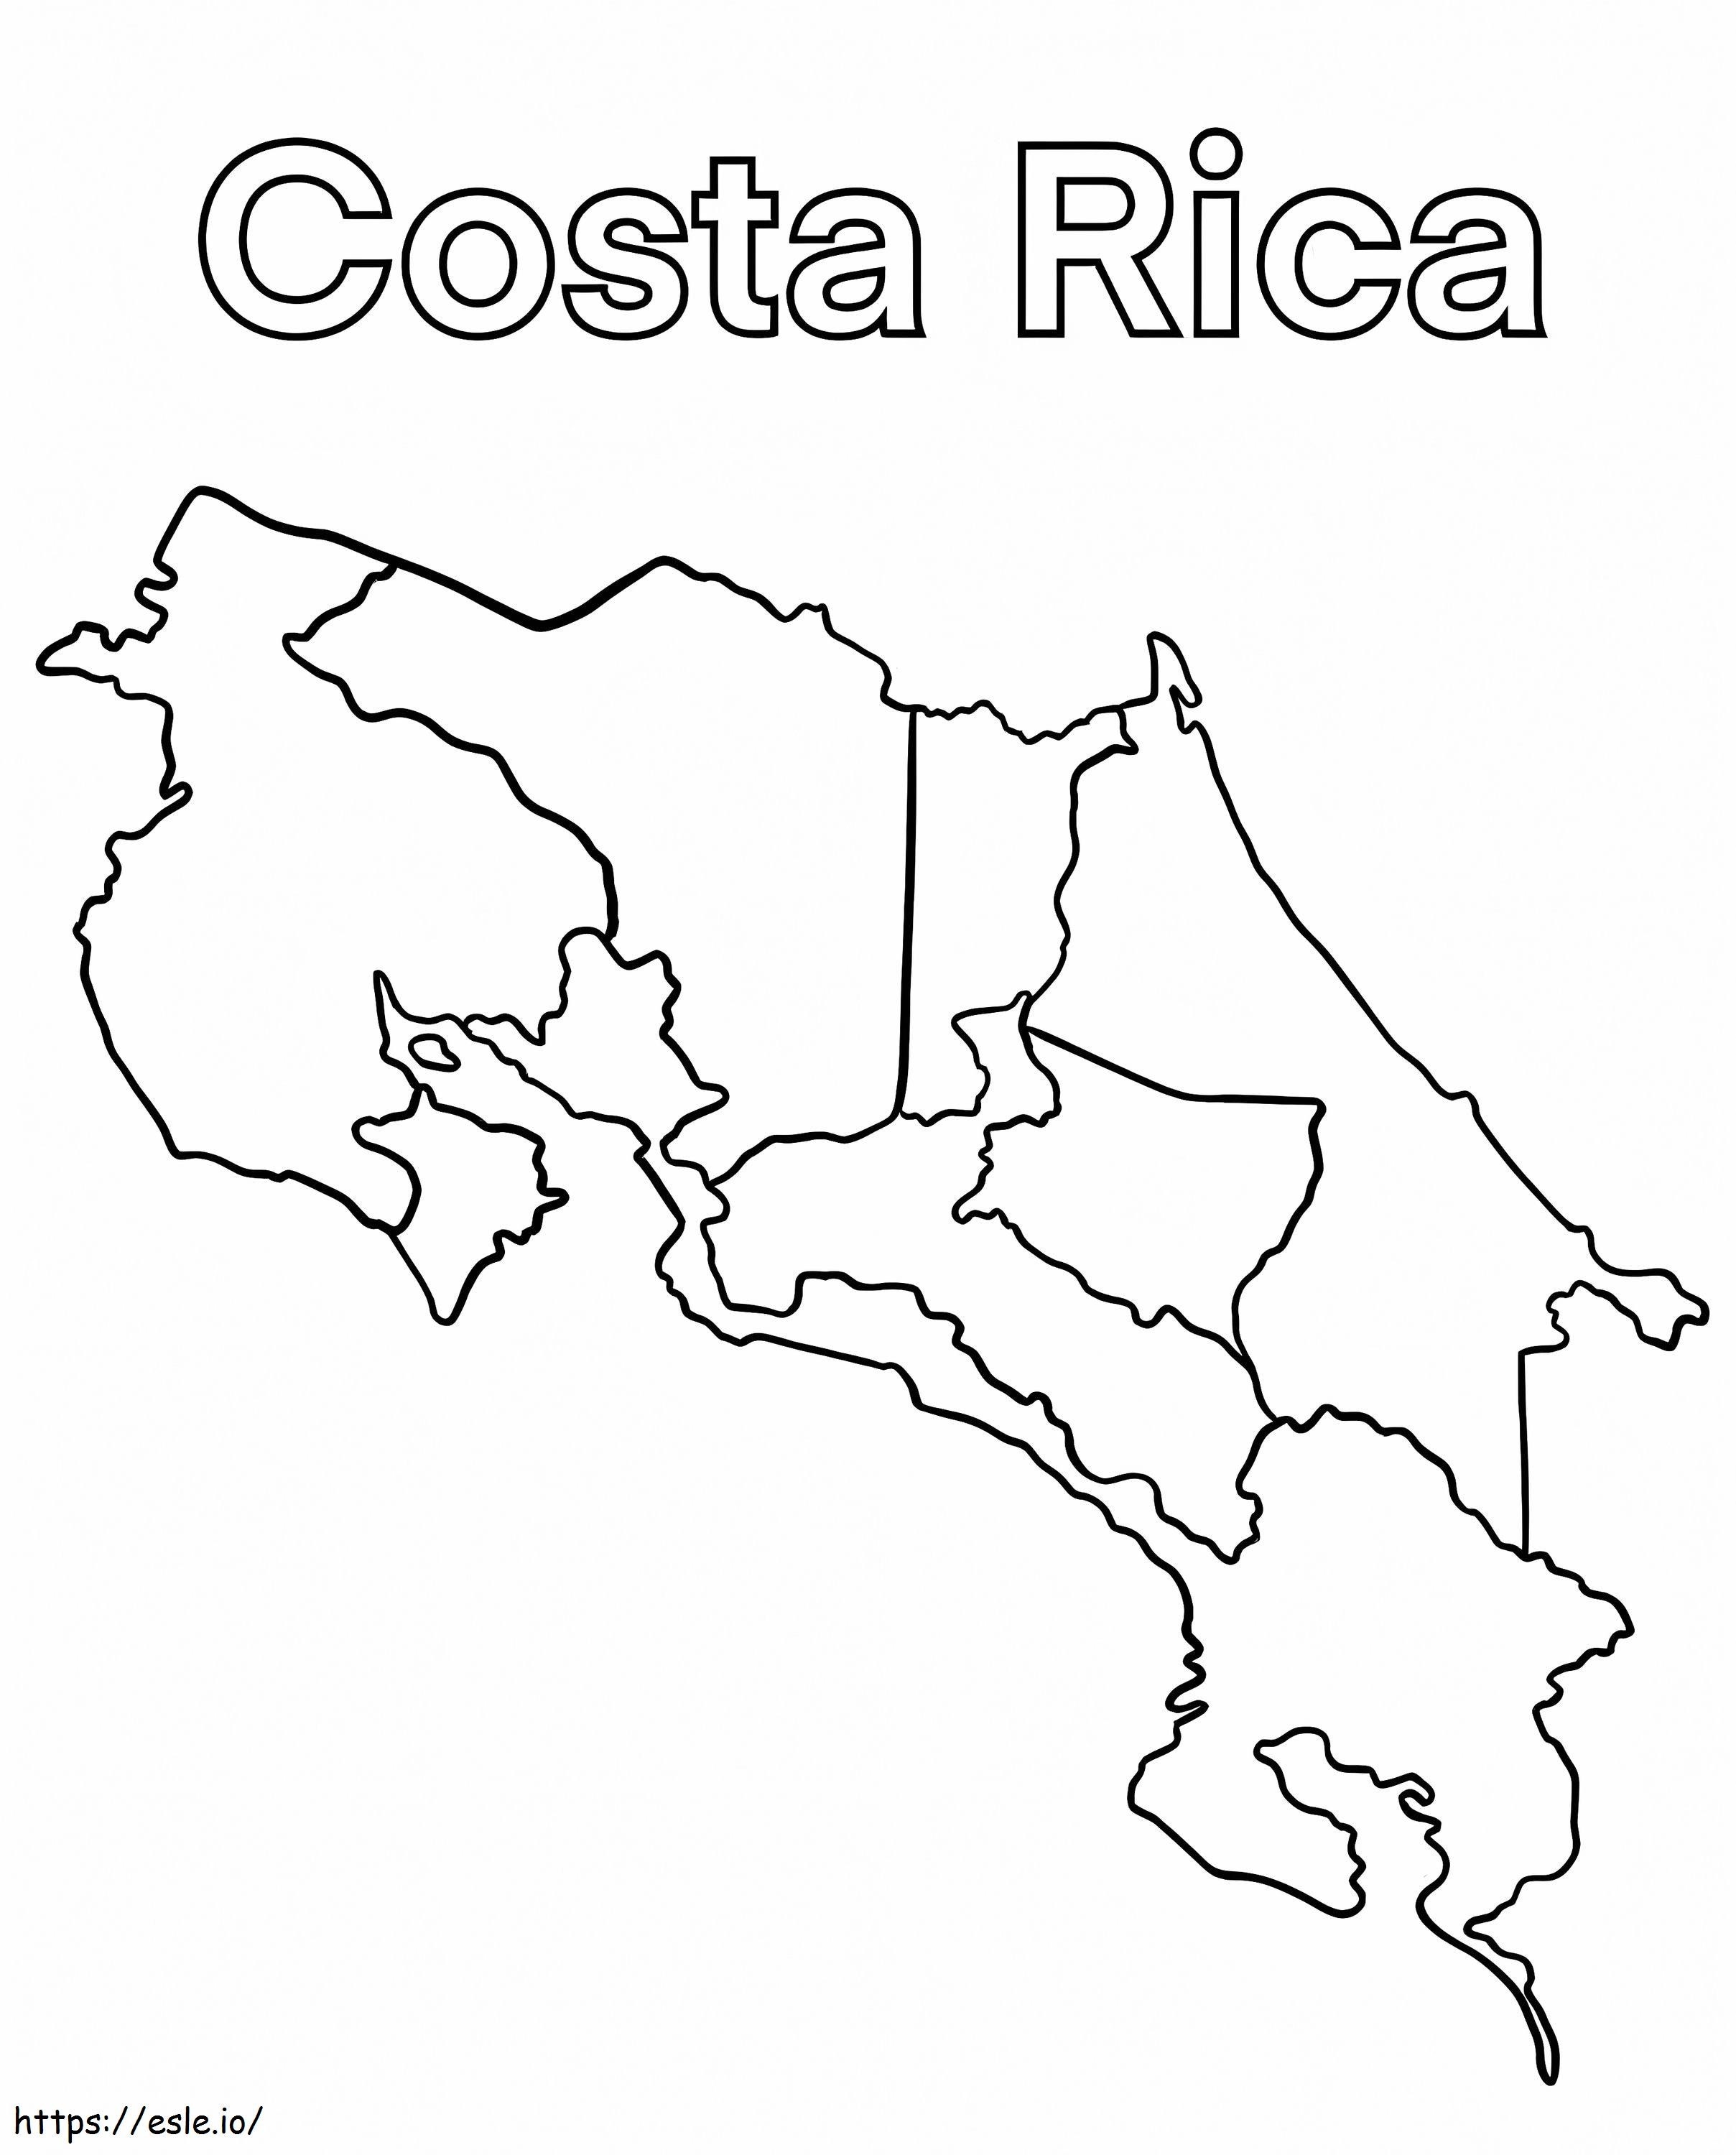 Costa Rica Map coloring page